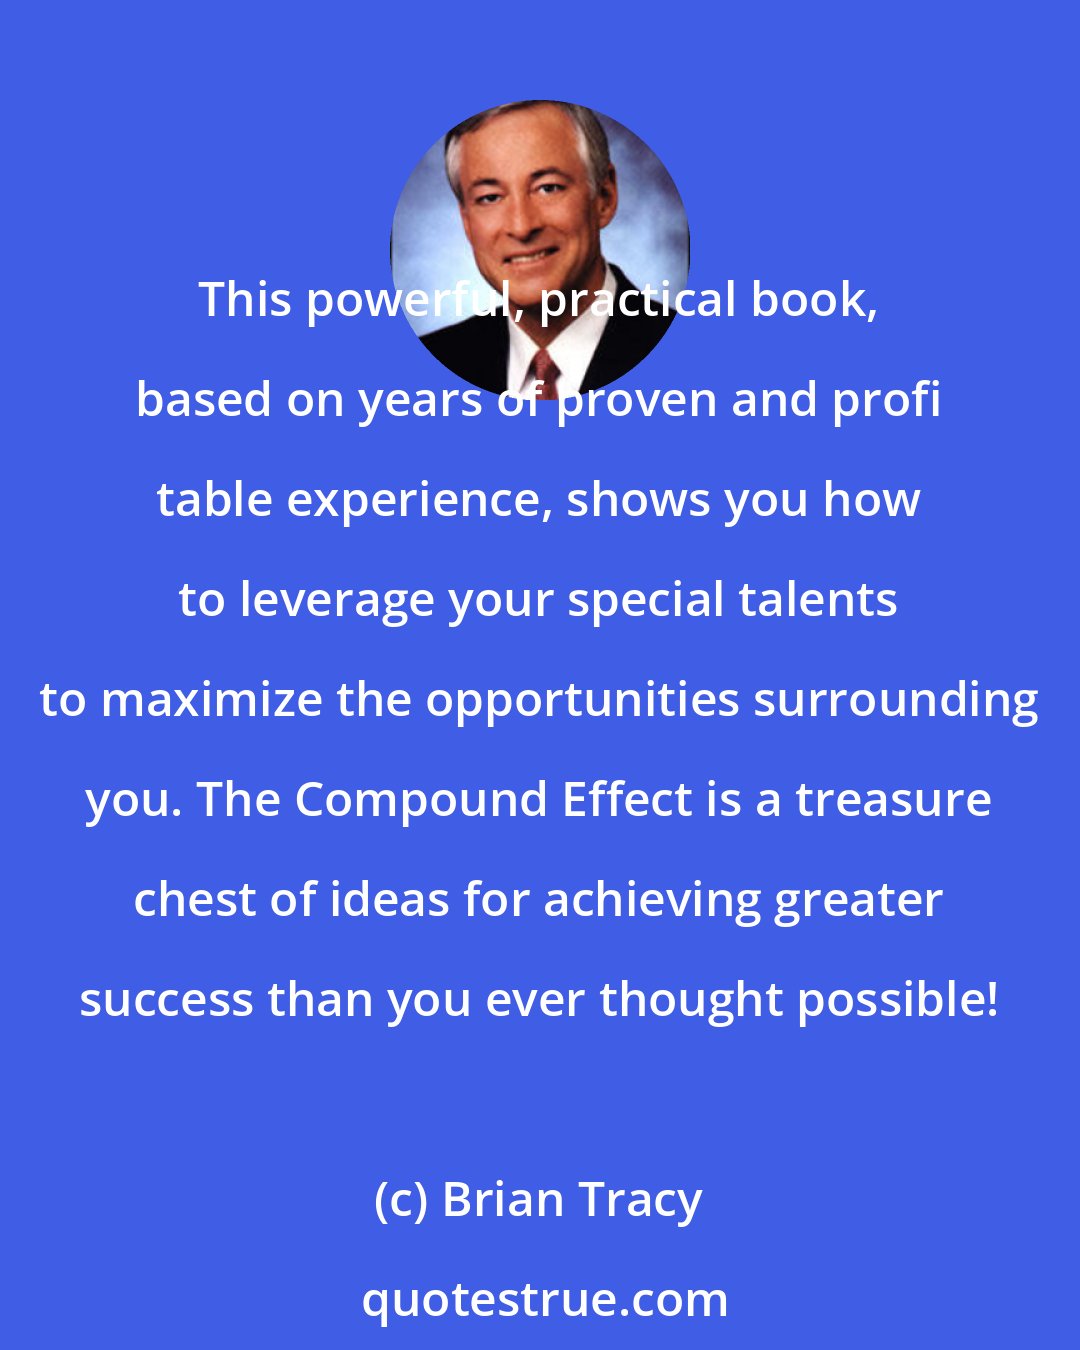 Brian Tracy: This powerful, practical book, based on years of proven and profi table experience, shows you how to leverage your special talents to maximize the opportunities surrounding you. The Compound Effect is a treasure chest of ideas for achieving greater success than you ever thought possible!